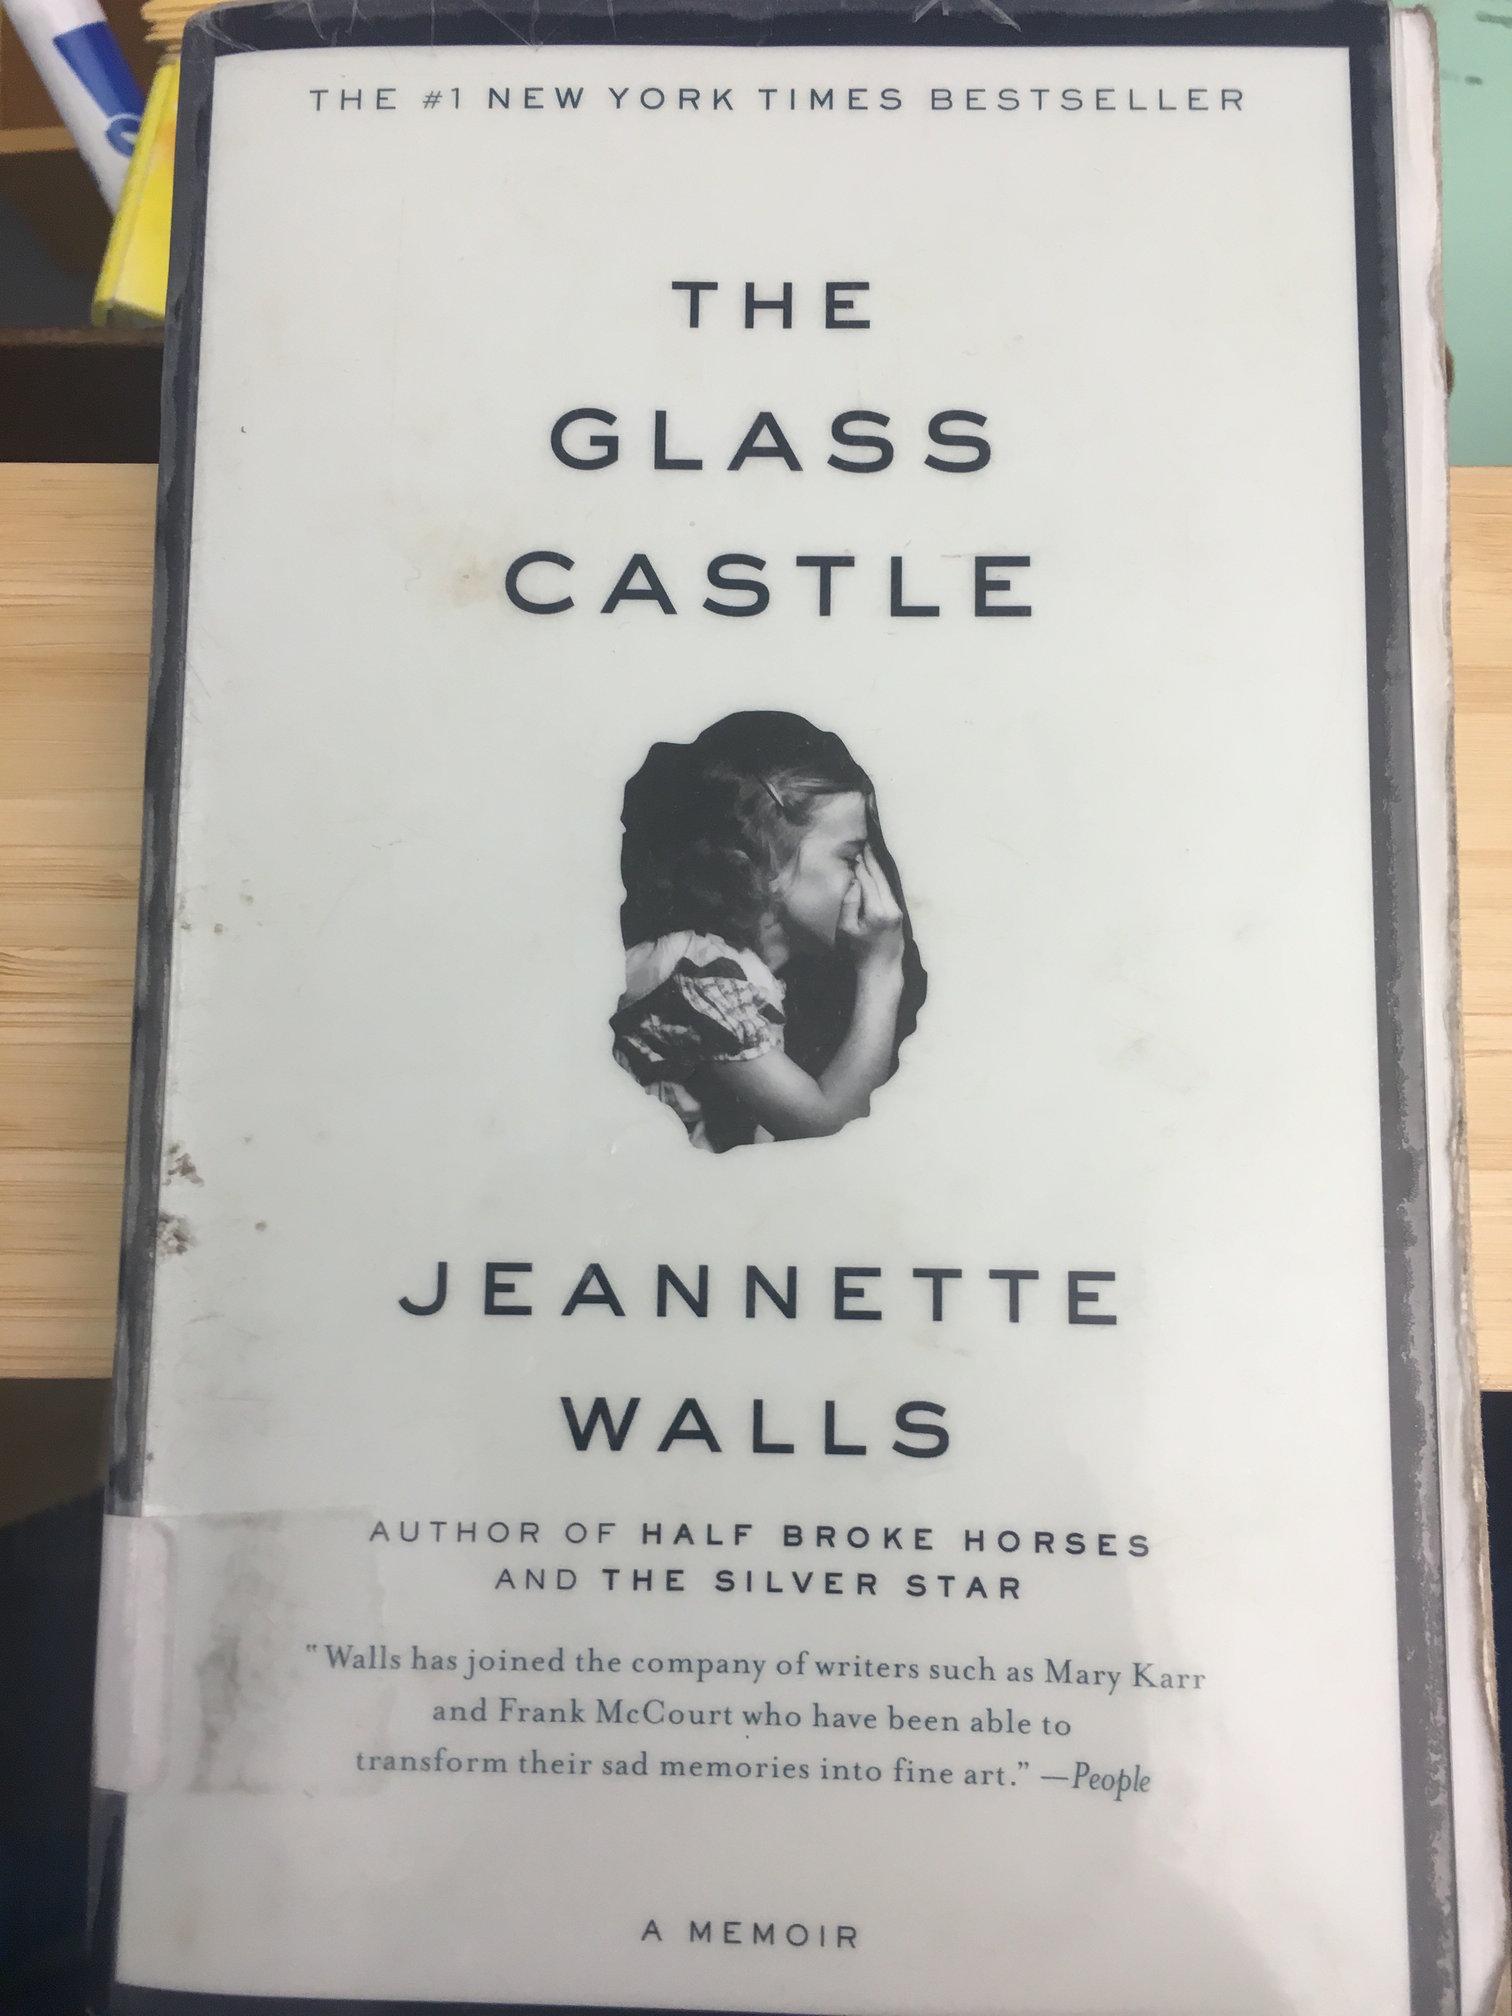 The Glass Castle is a heart wrenching but uplifting book that shows the struggles and hardships of author Jeannette Walls childhood